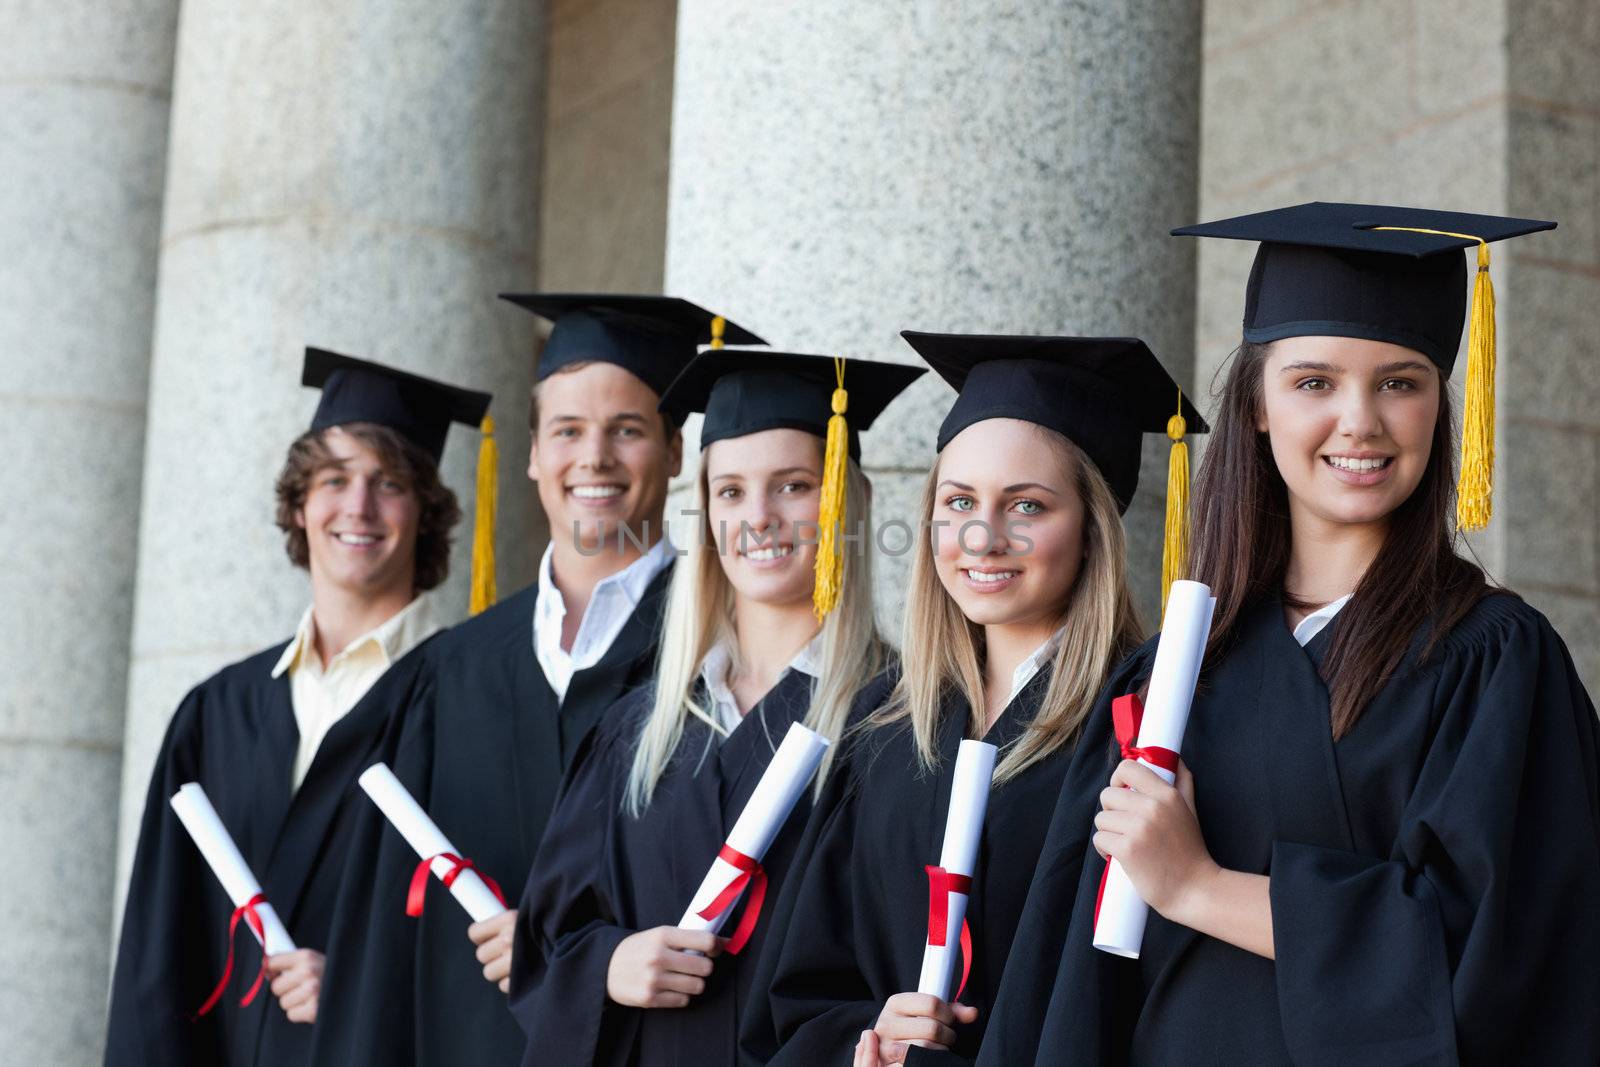 Graduates posing in single line with columns in background